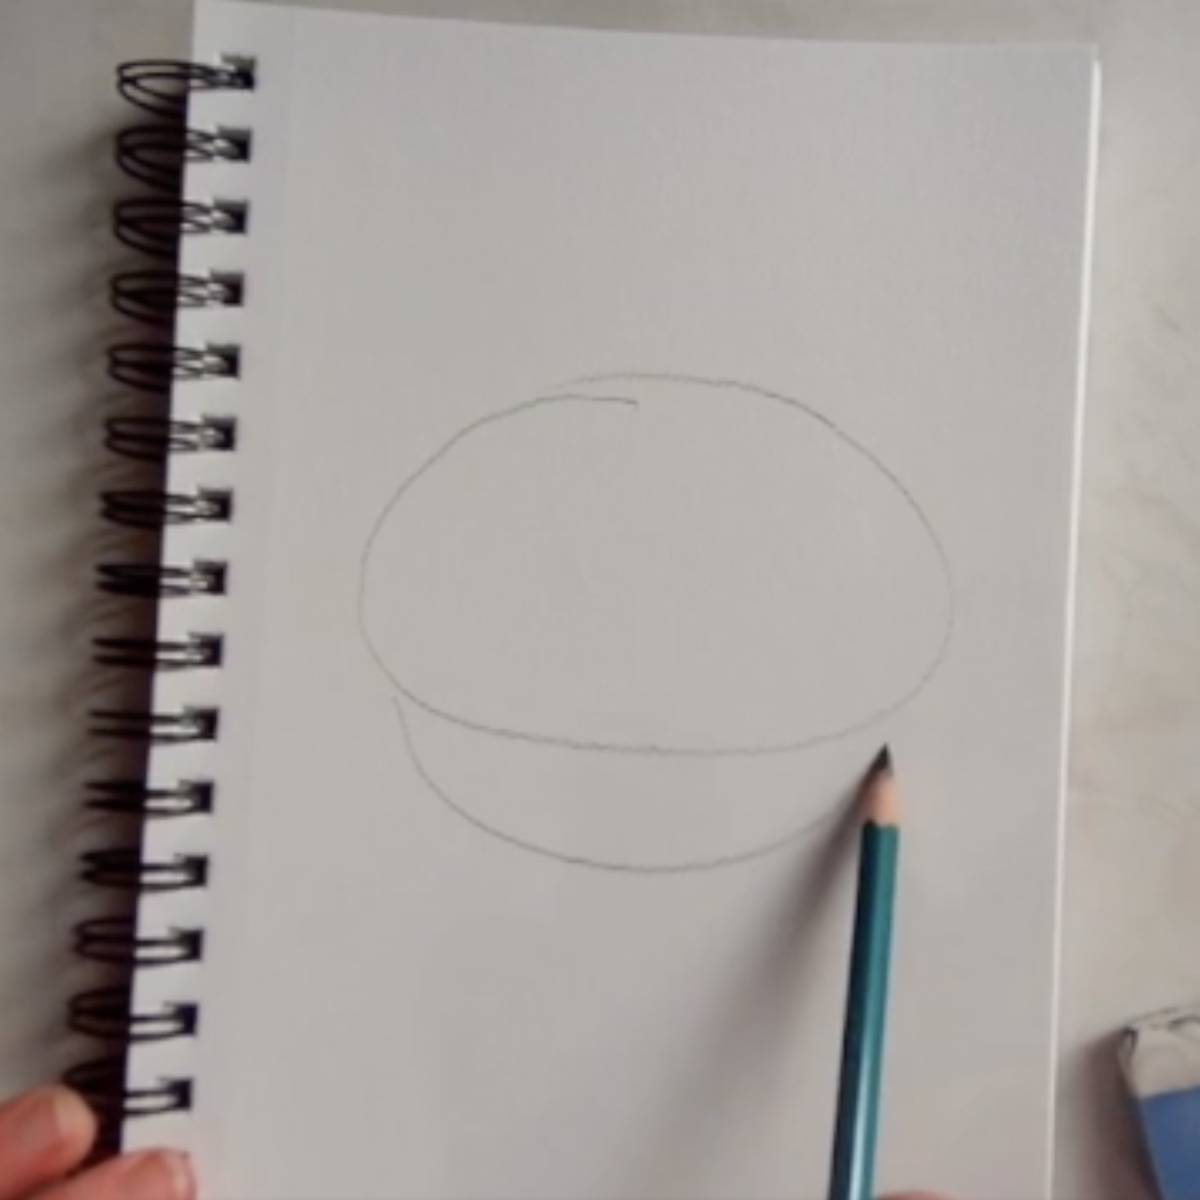 Sketch an oval with a bowl shape underneath 